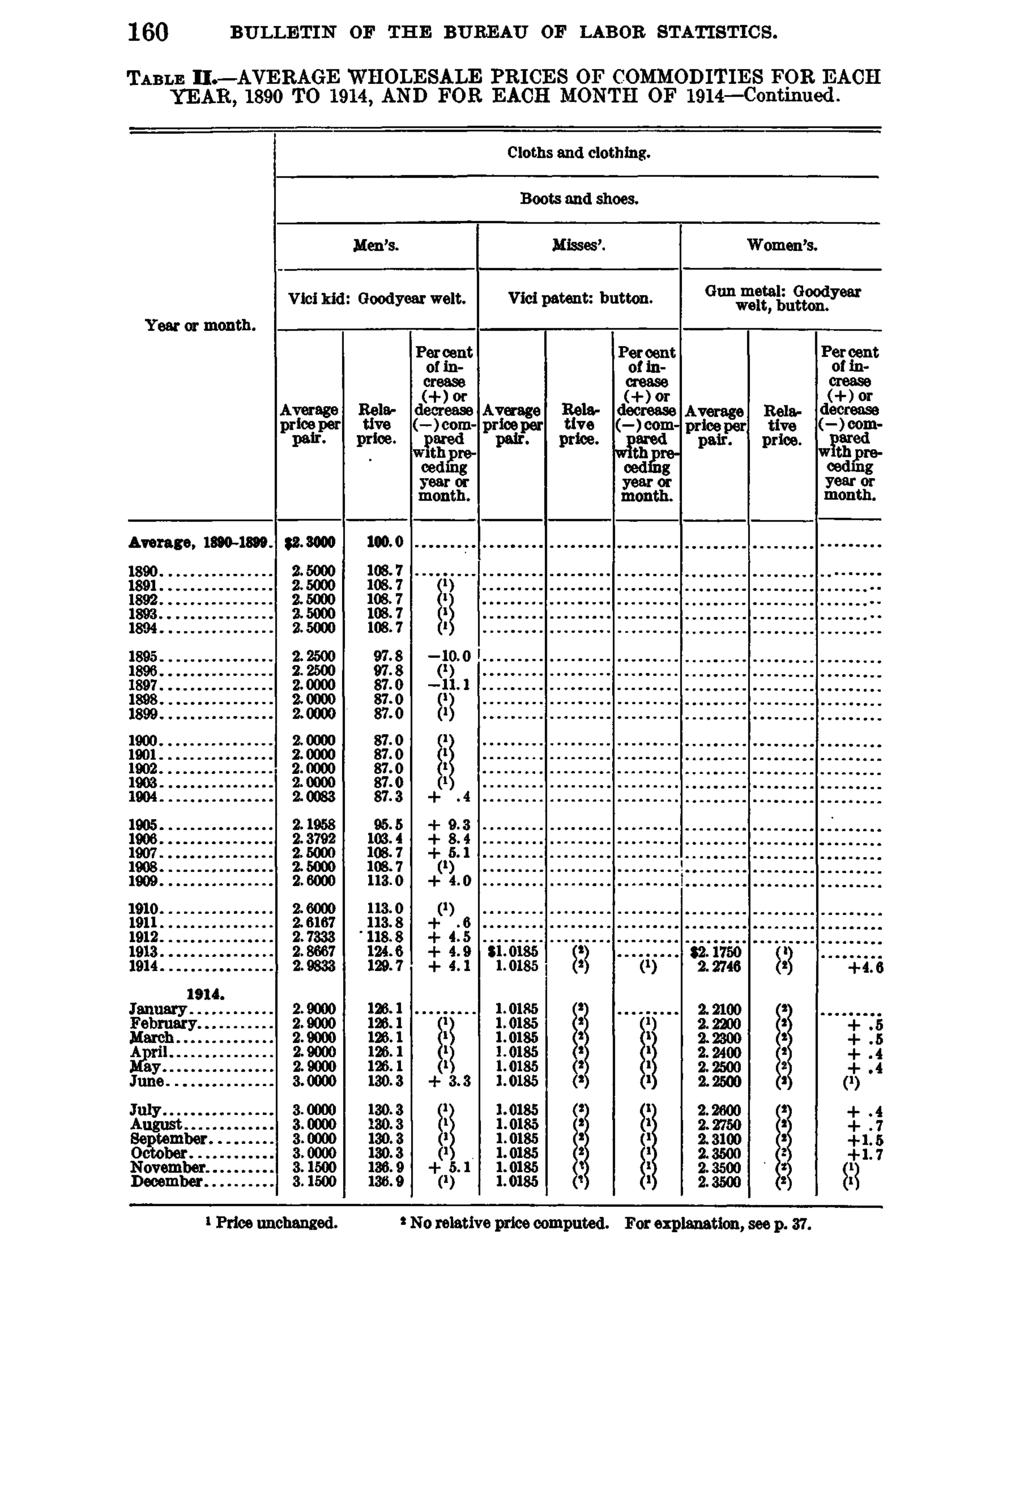 160 BULLETIN OF THE BUREAU OF LABOR STATISTICS. T a b l e II. AVERAGE WHOLESALE PRICES OF COMMODITIES FOR EACH YEAR, 1890 TO 1914, AND FOR EACH MONTH OF 1914 Continued. Cloths and clothing.